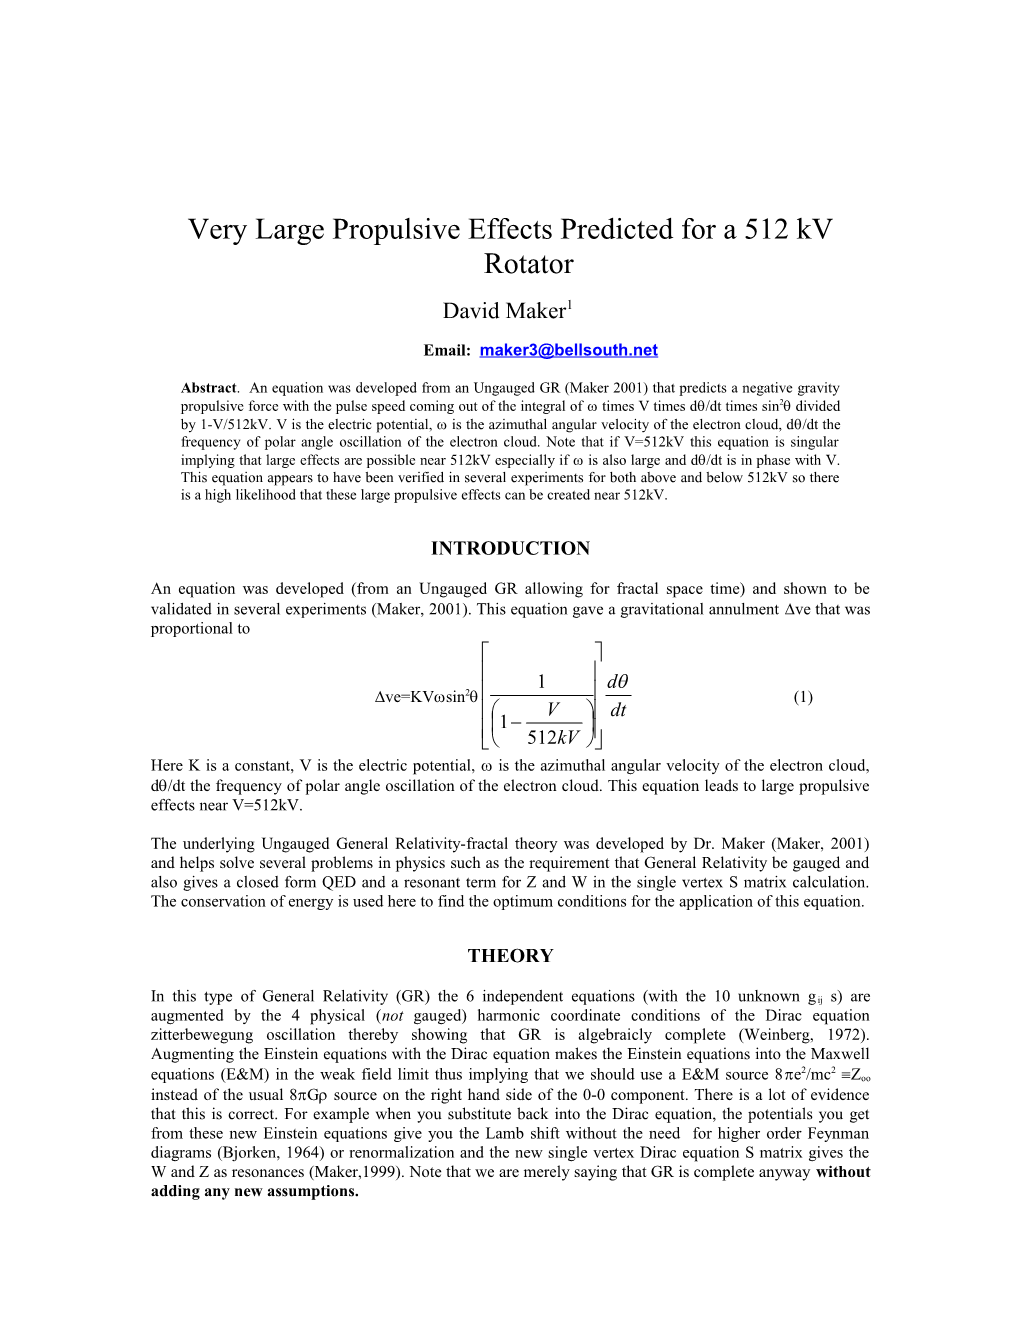 Very Large Propulsive Effects Predicted for a 512 Kv Rotator